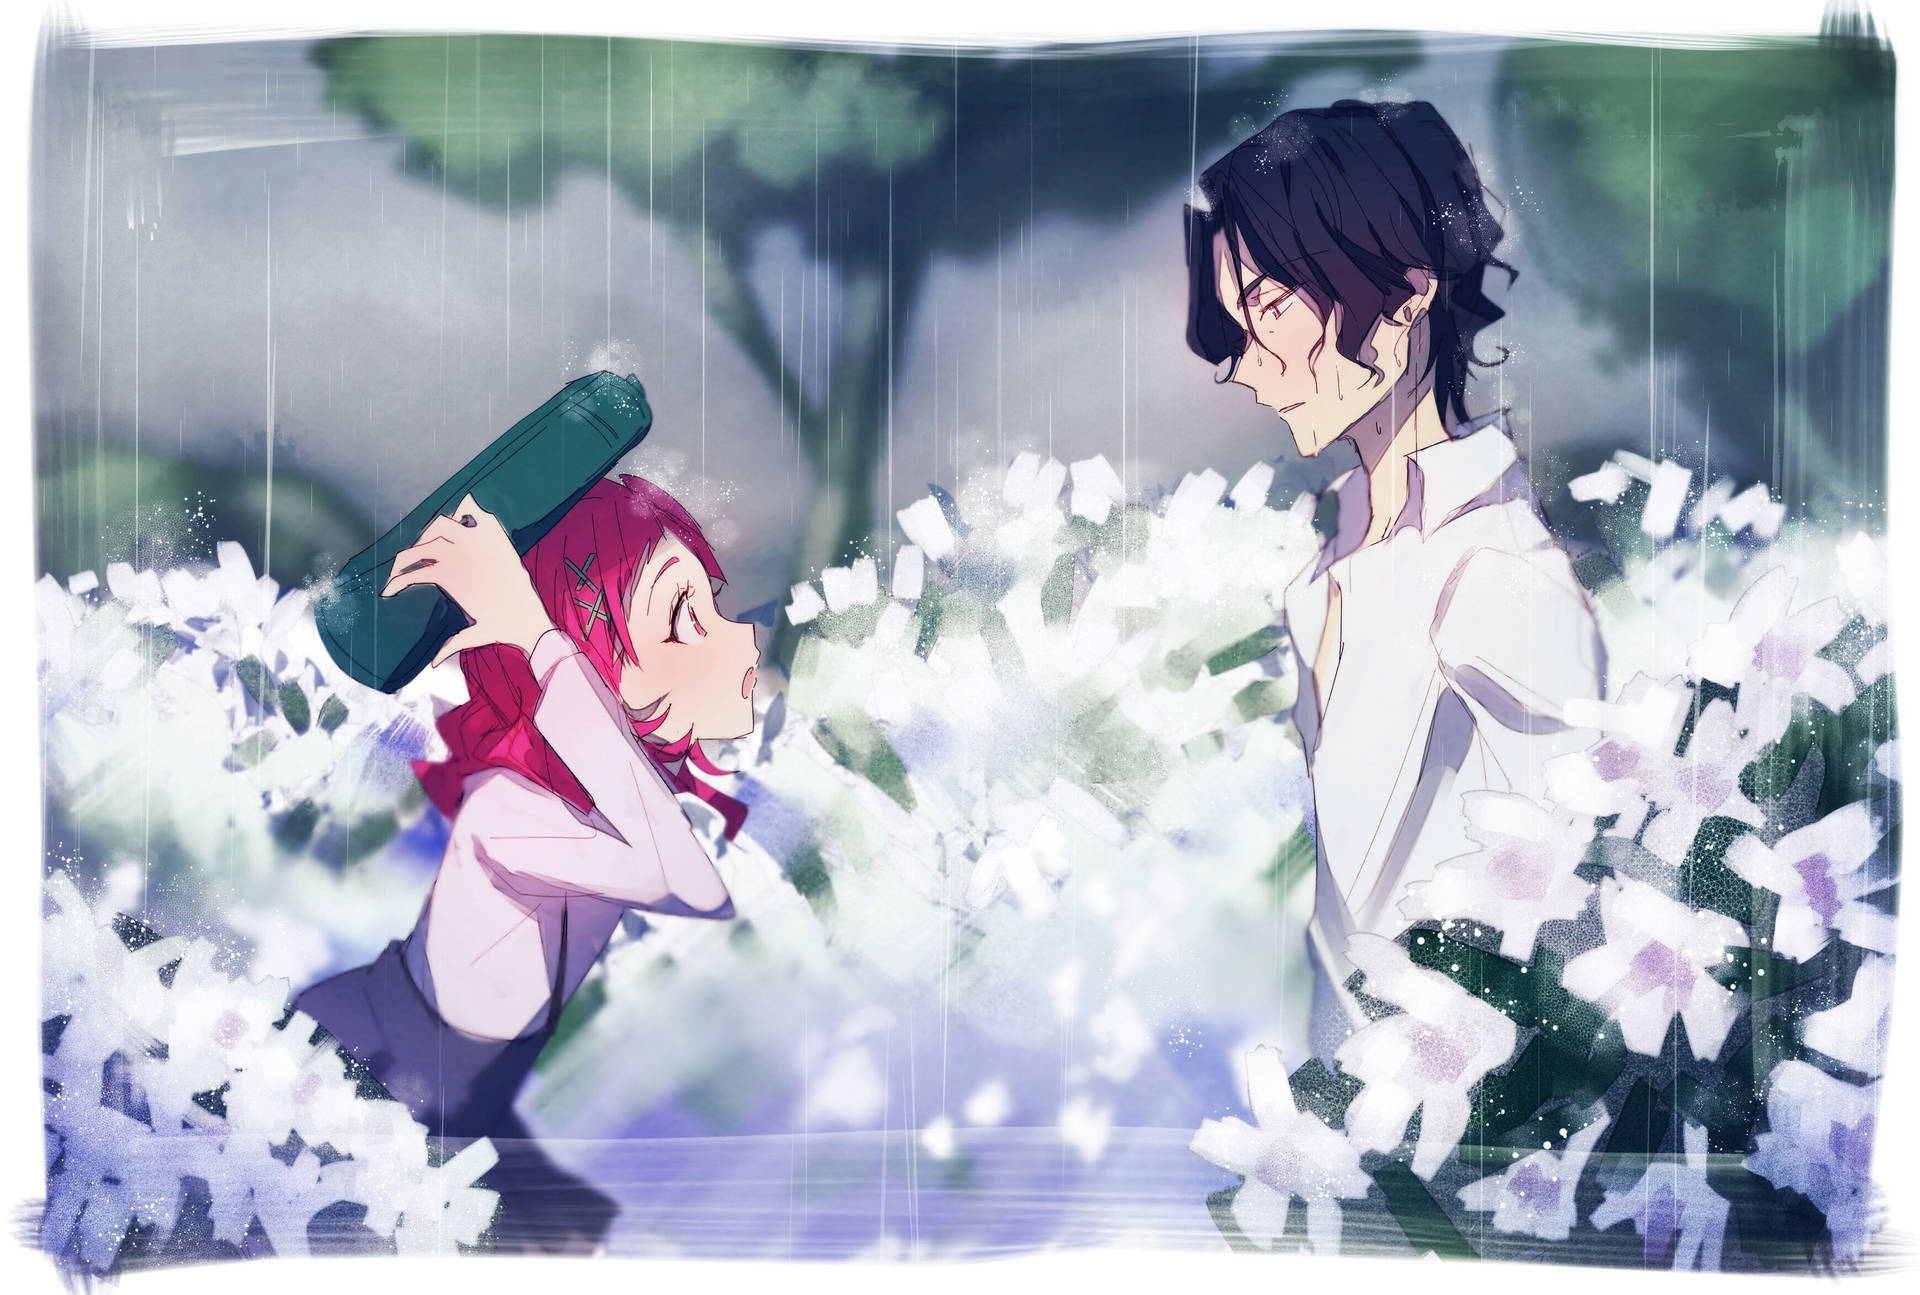 Cute Anime Couple In The Rain Background